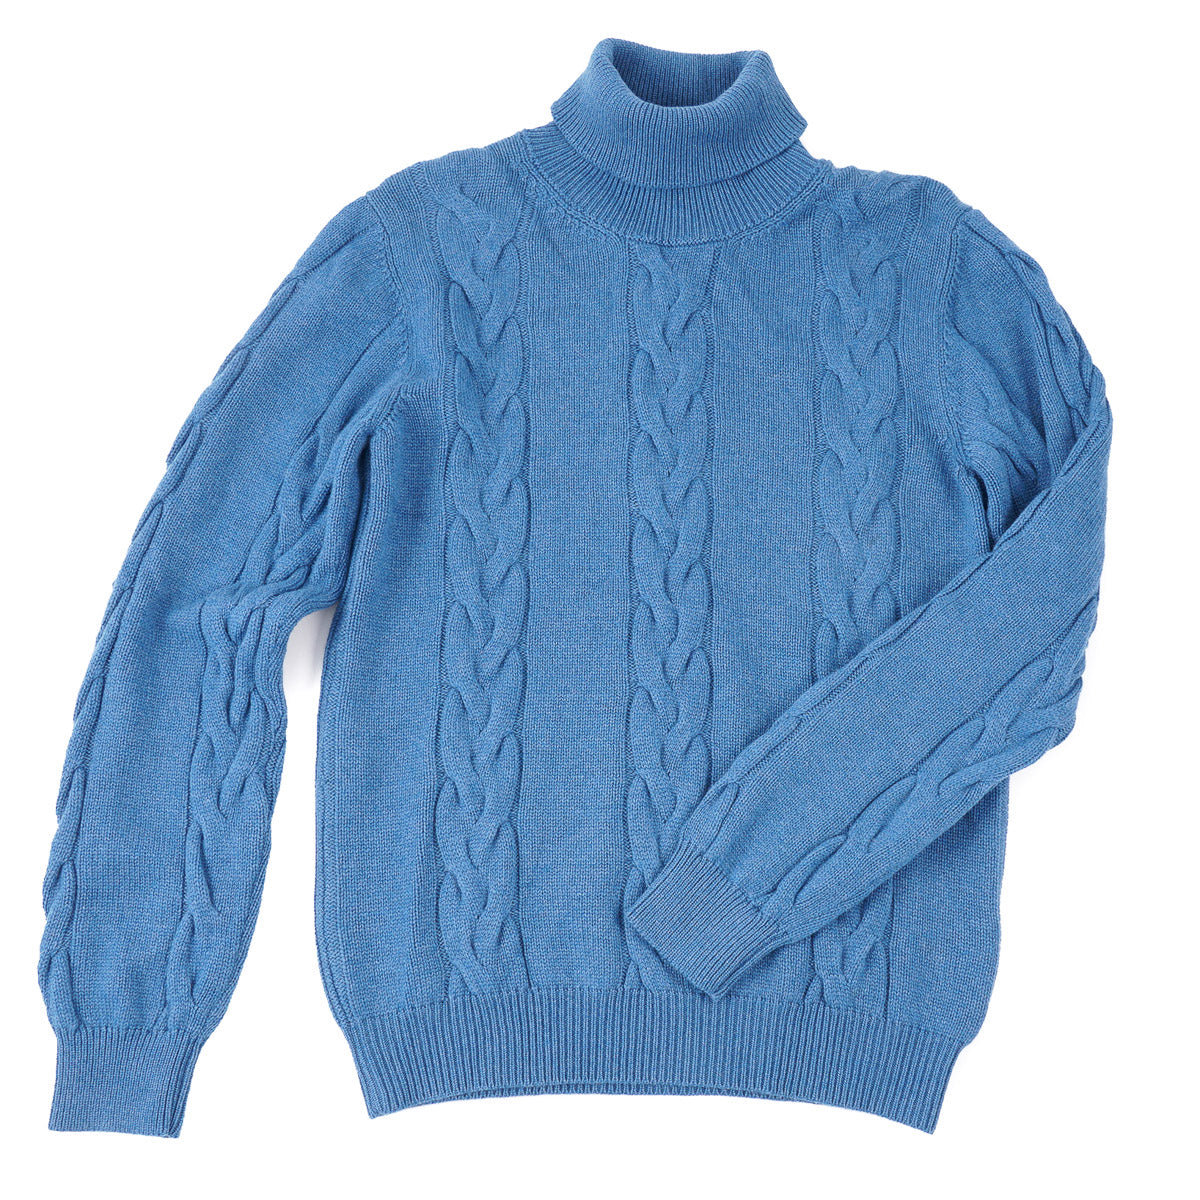 Kiton Cable Knit Cashmere Sweater - Top Shelf Apparel